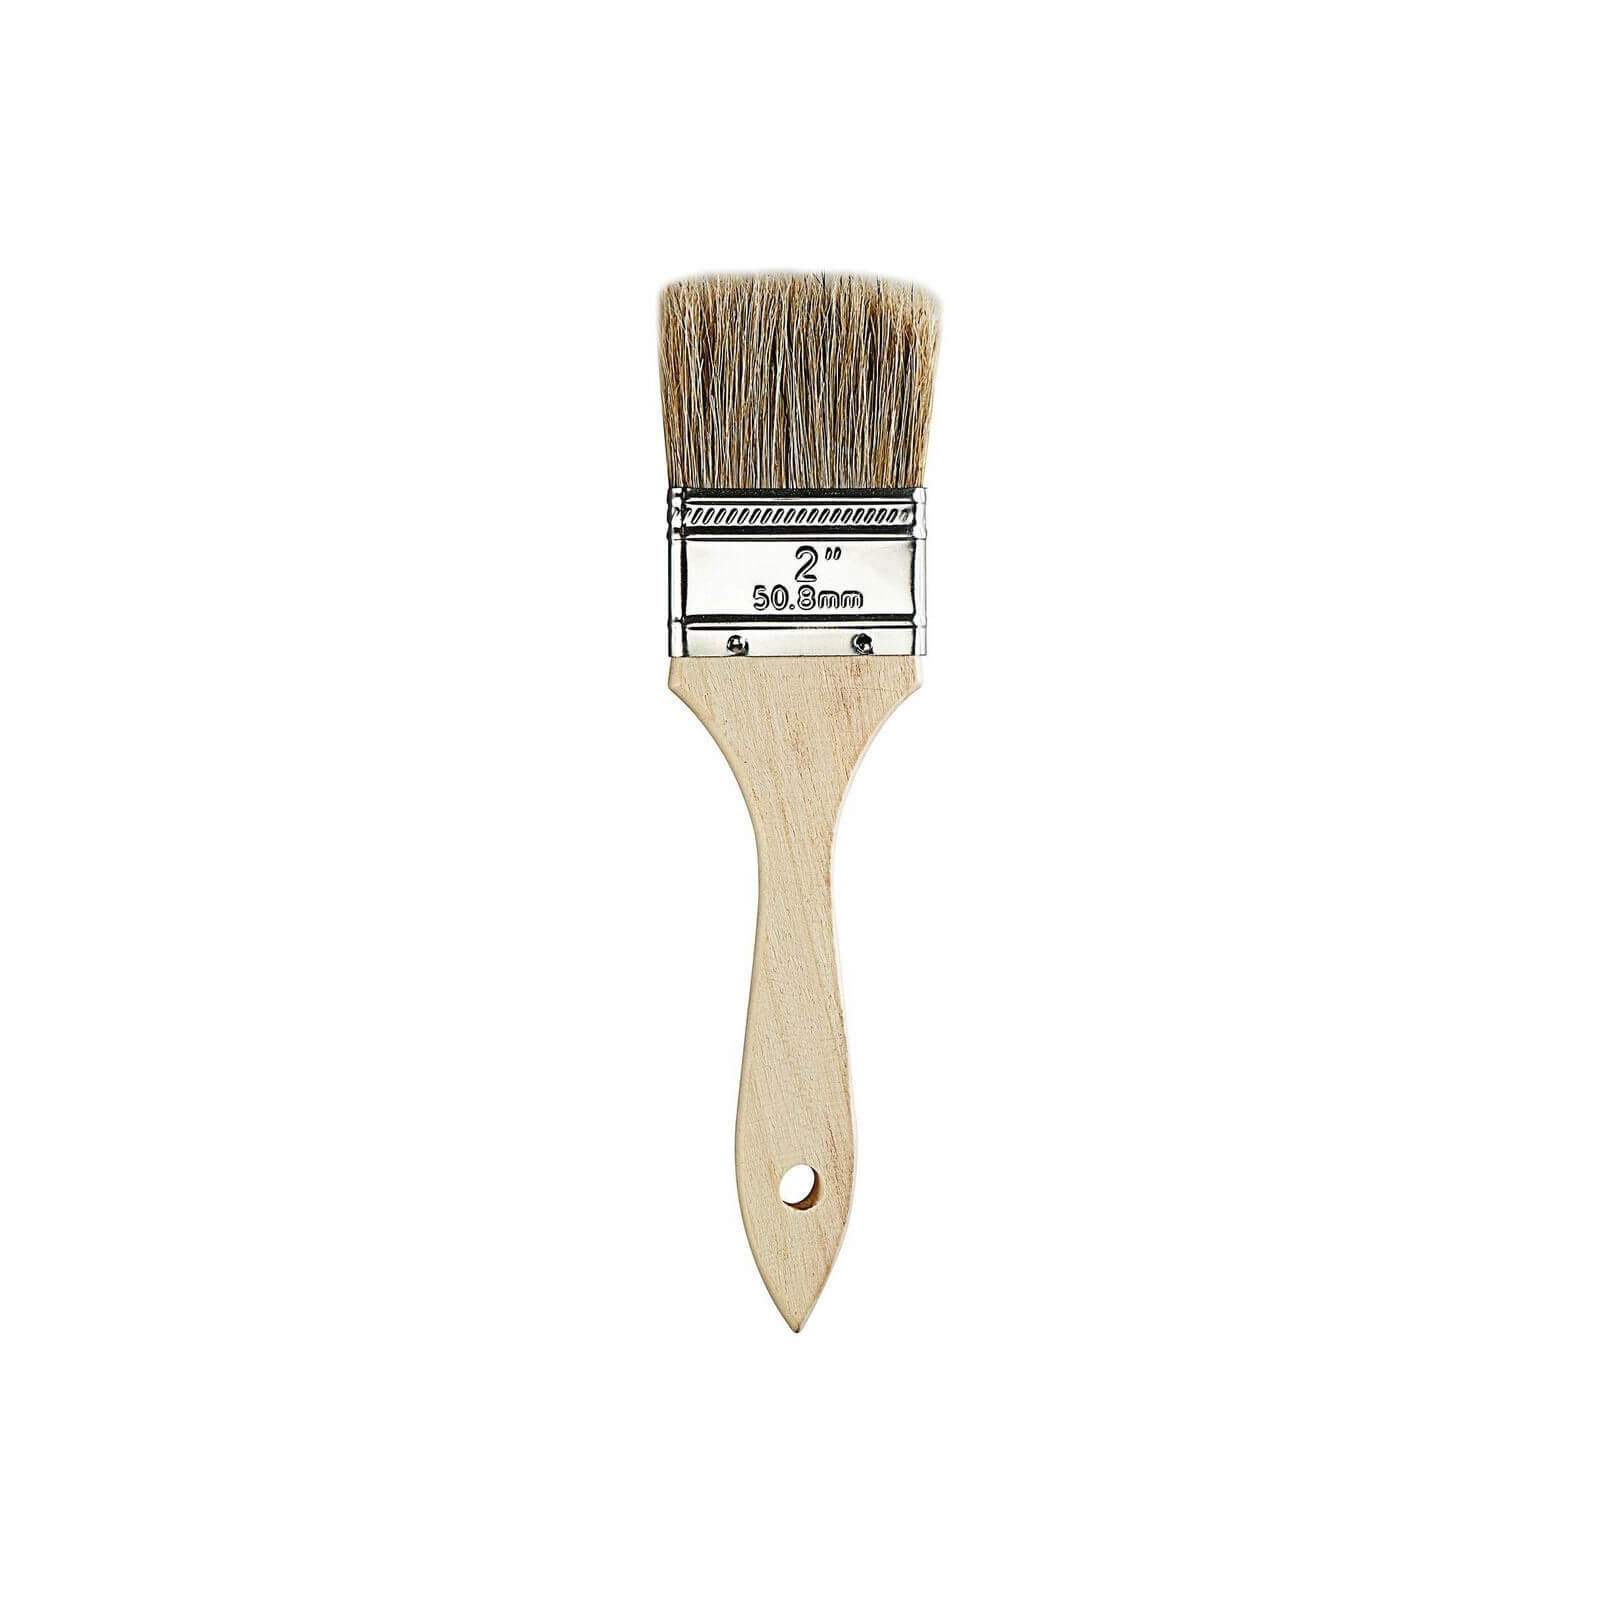 Chip Brushes - Rossi Paint Stores - Single Thick - 2"